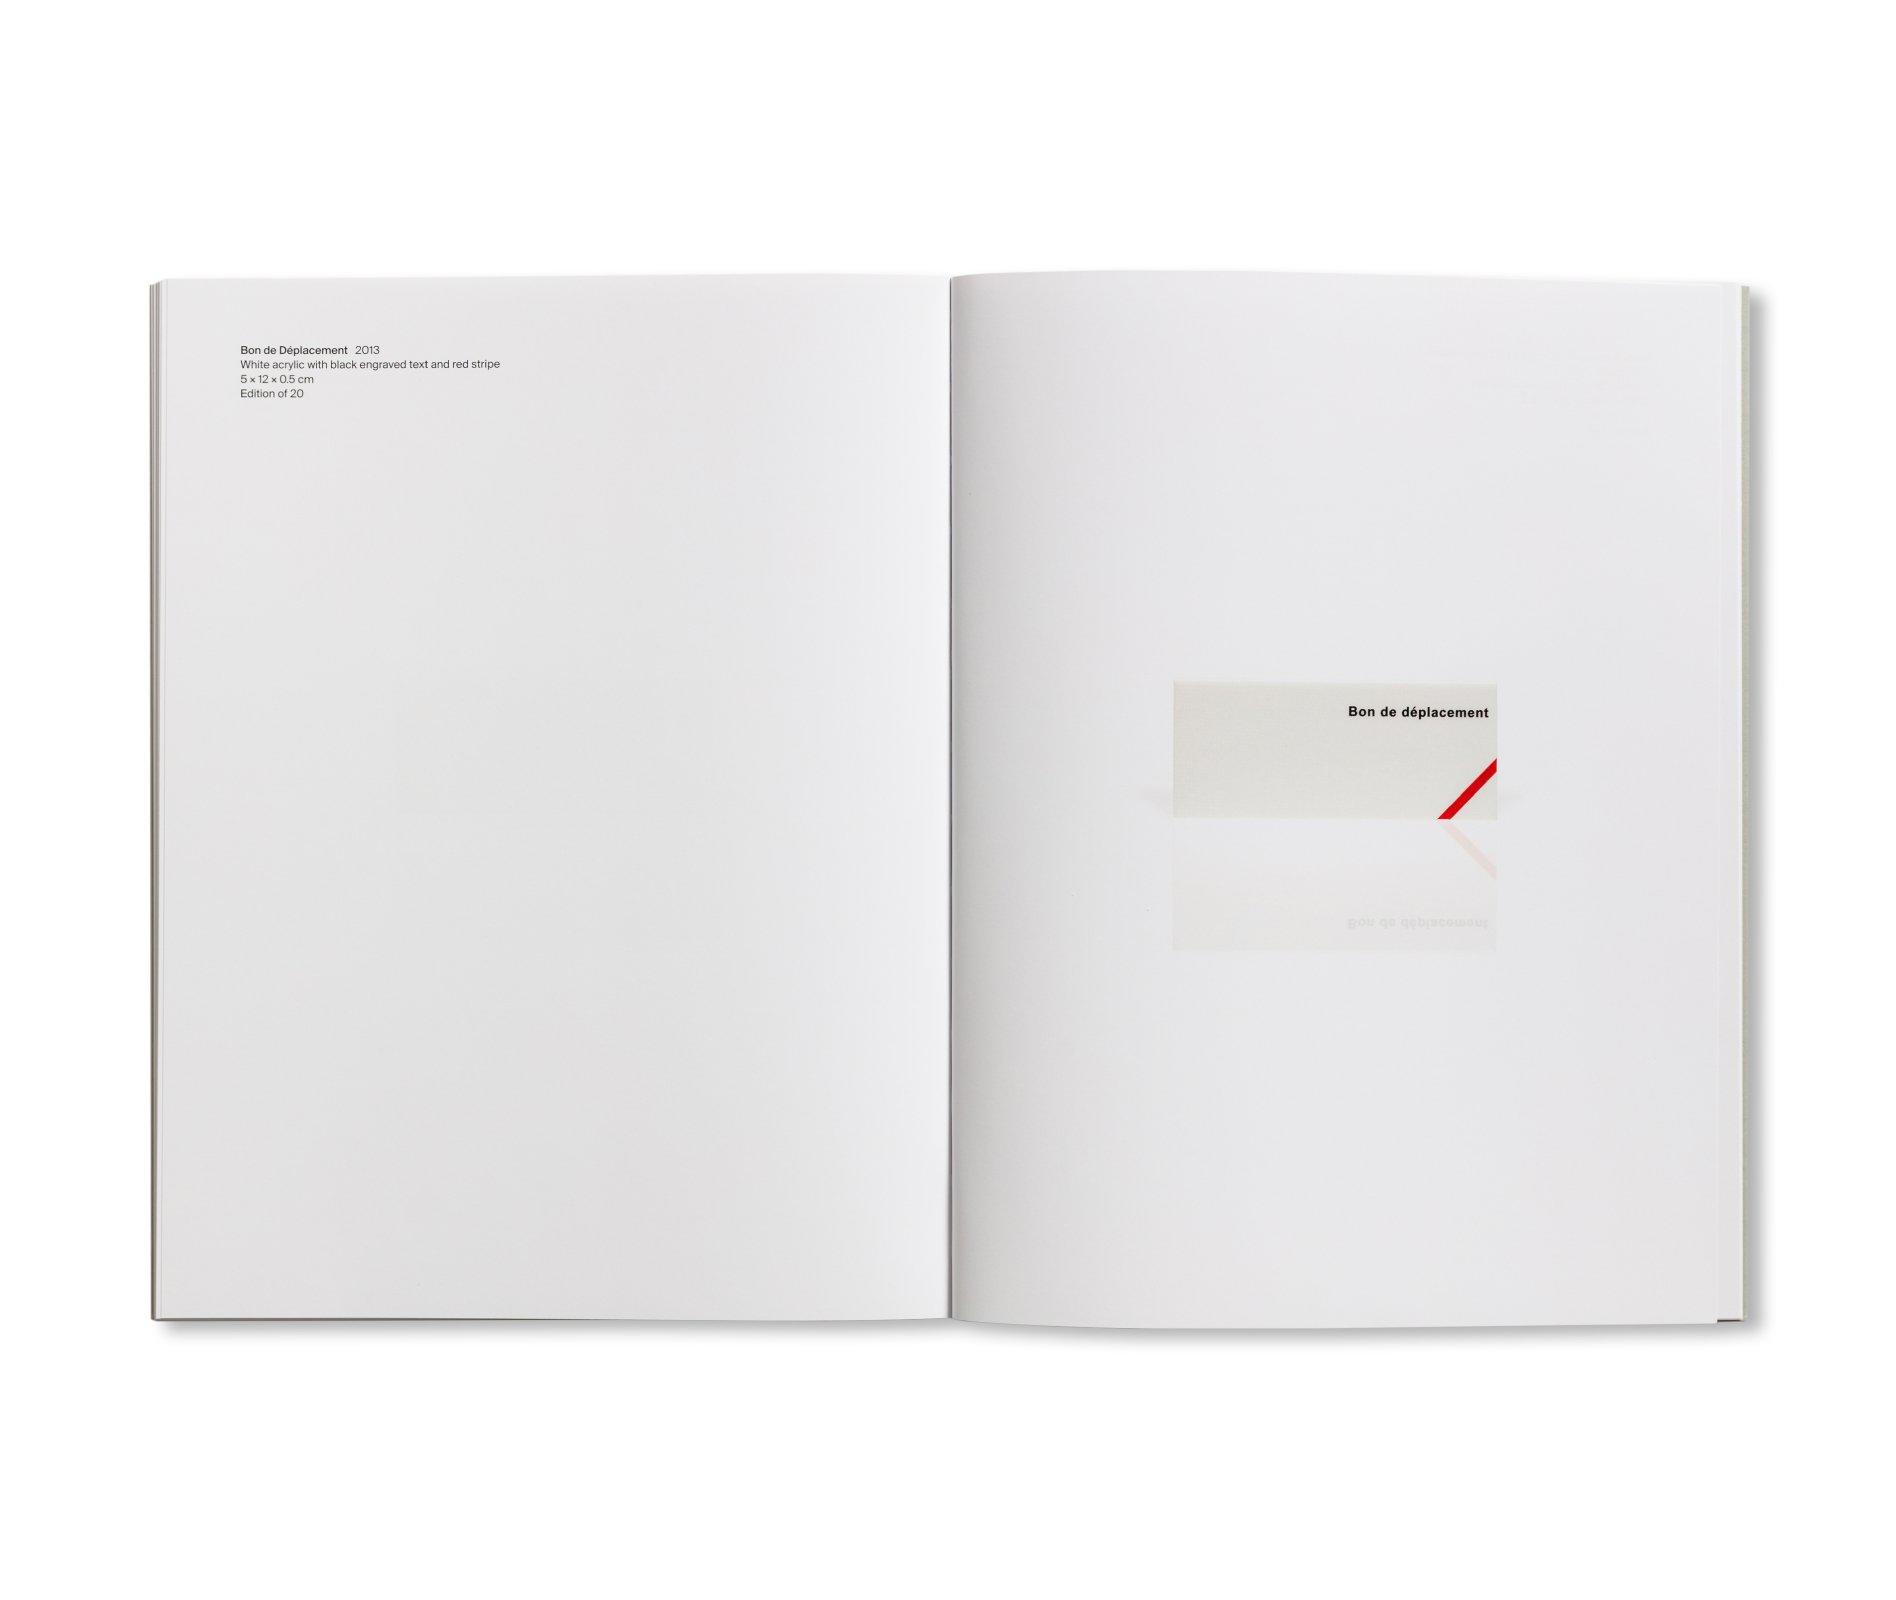 PRINTS AND MULTIPLES/ANNA BLESSMANN AND PETER SAVILLE by Peter Saville  ピーター・サヴィル  作品集